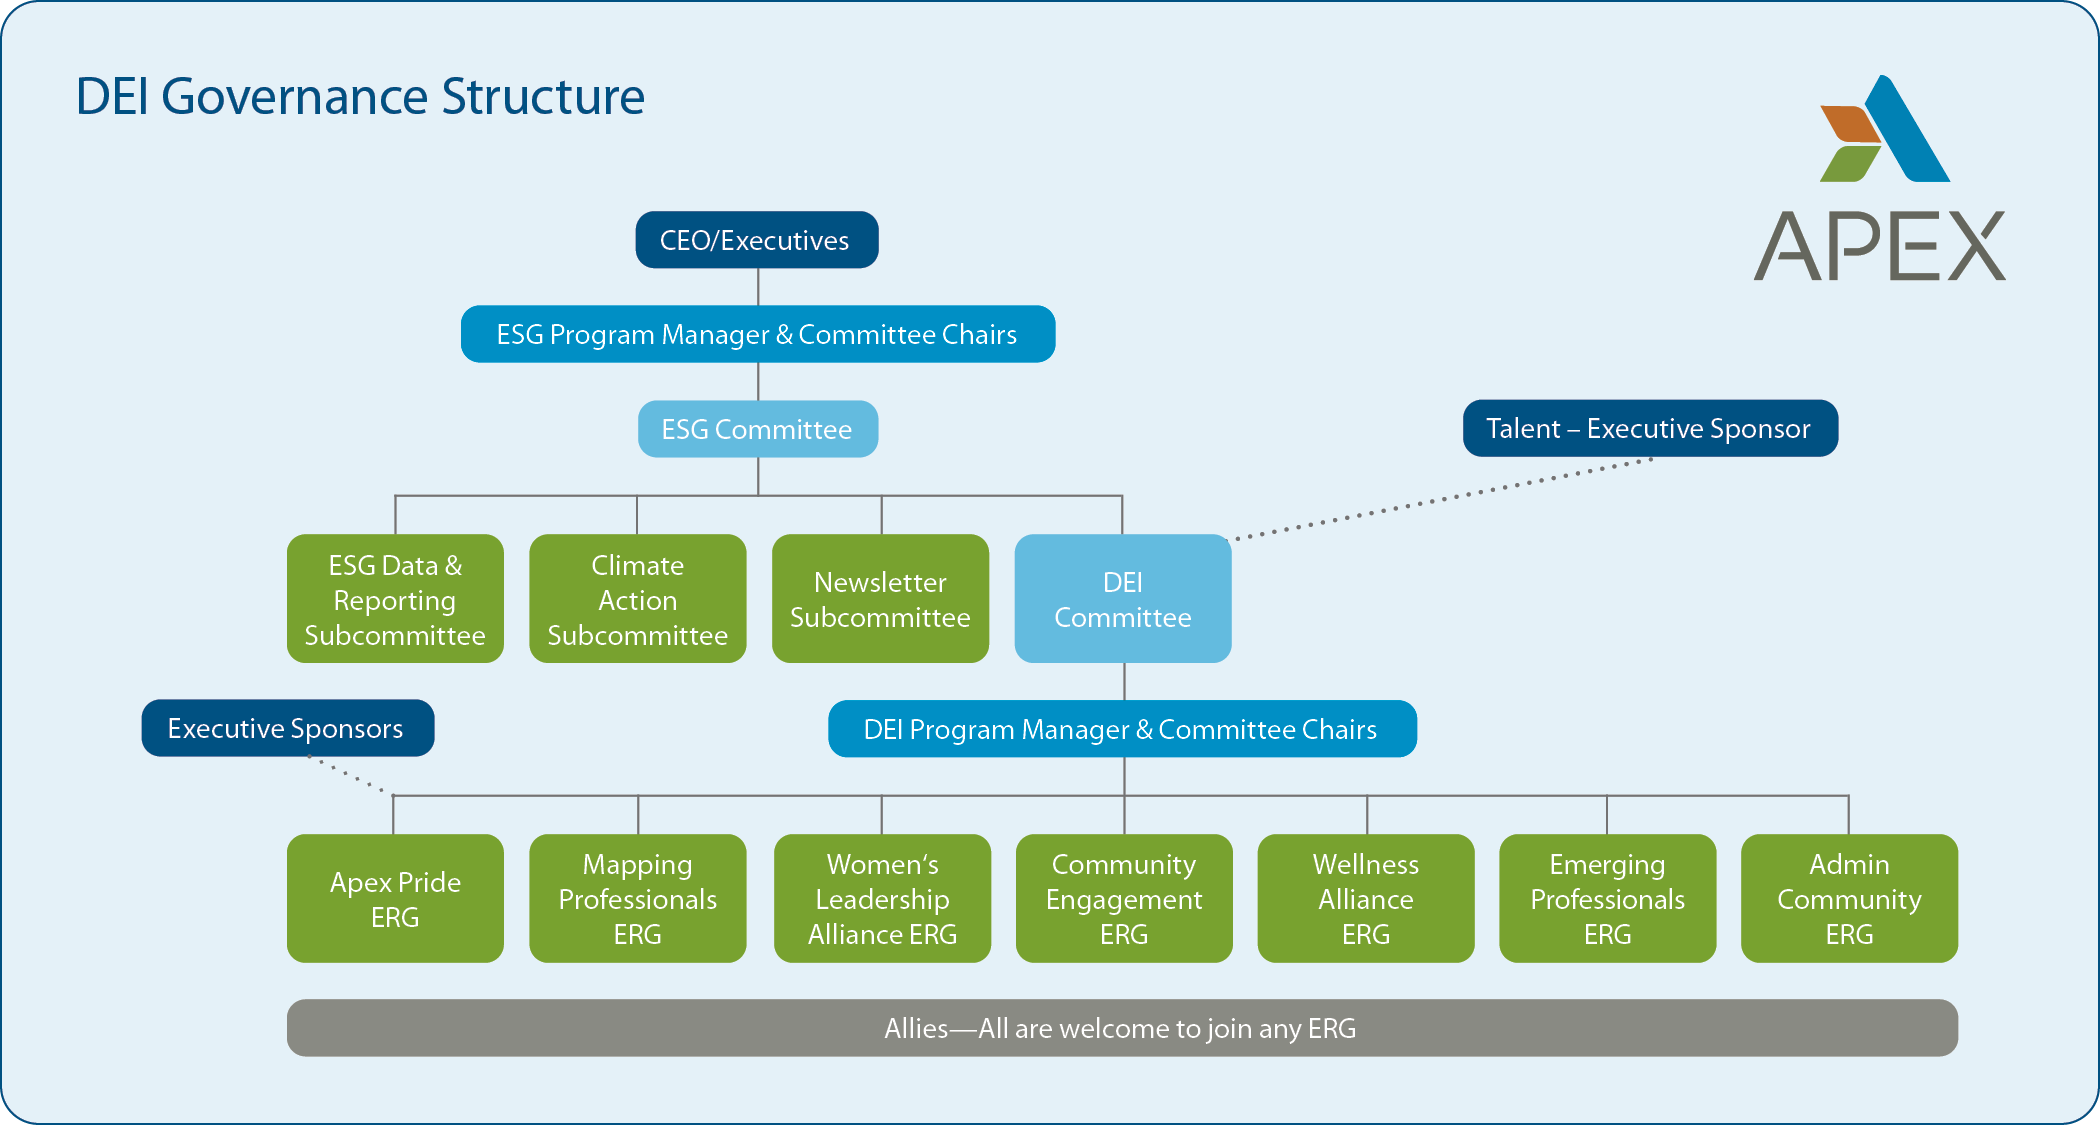 DEI Governance Structure chart organized to visualize the structure described above.